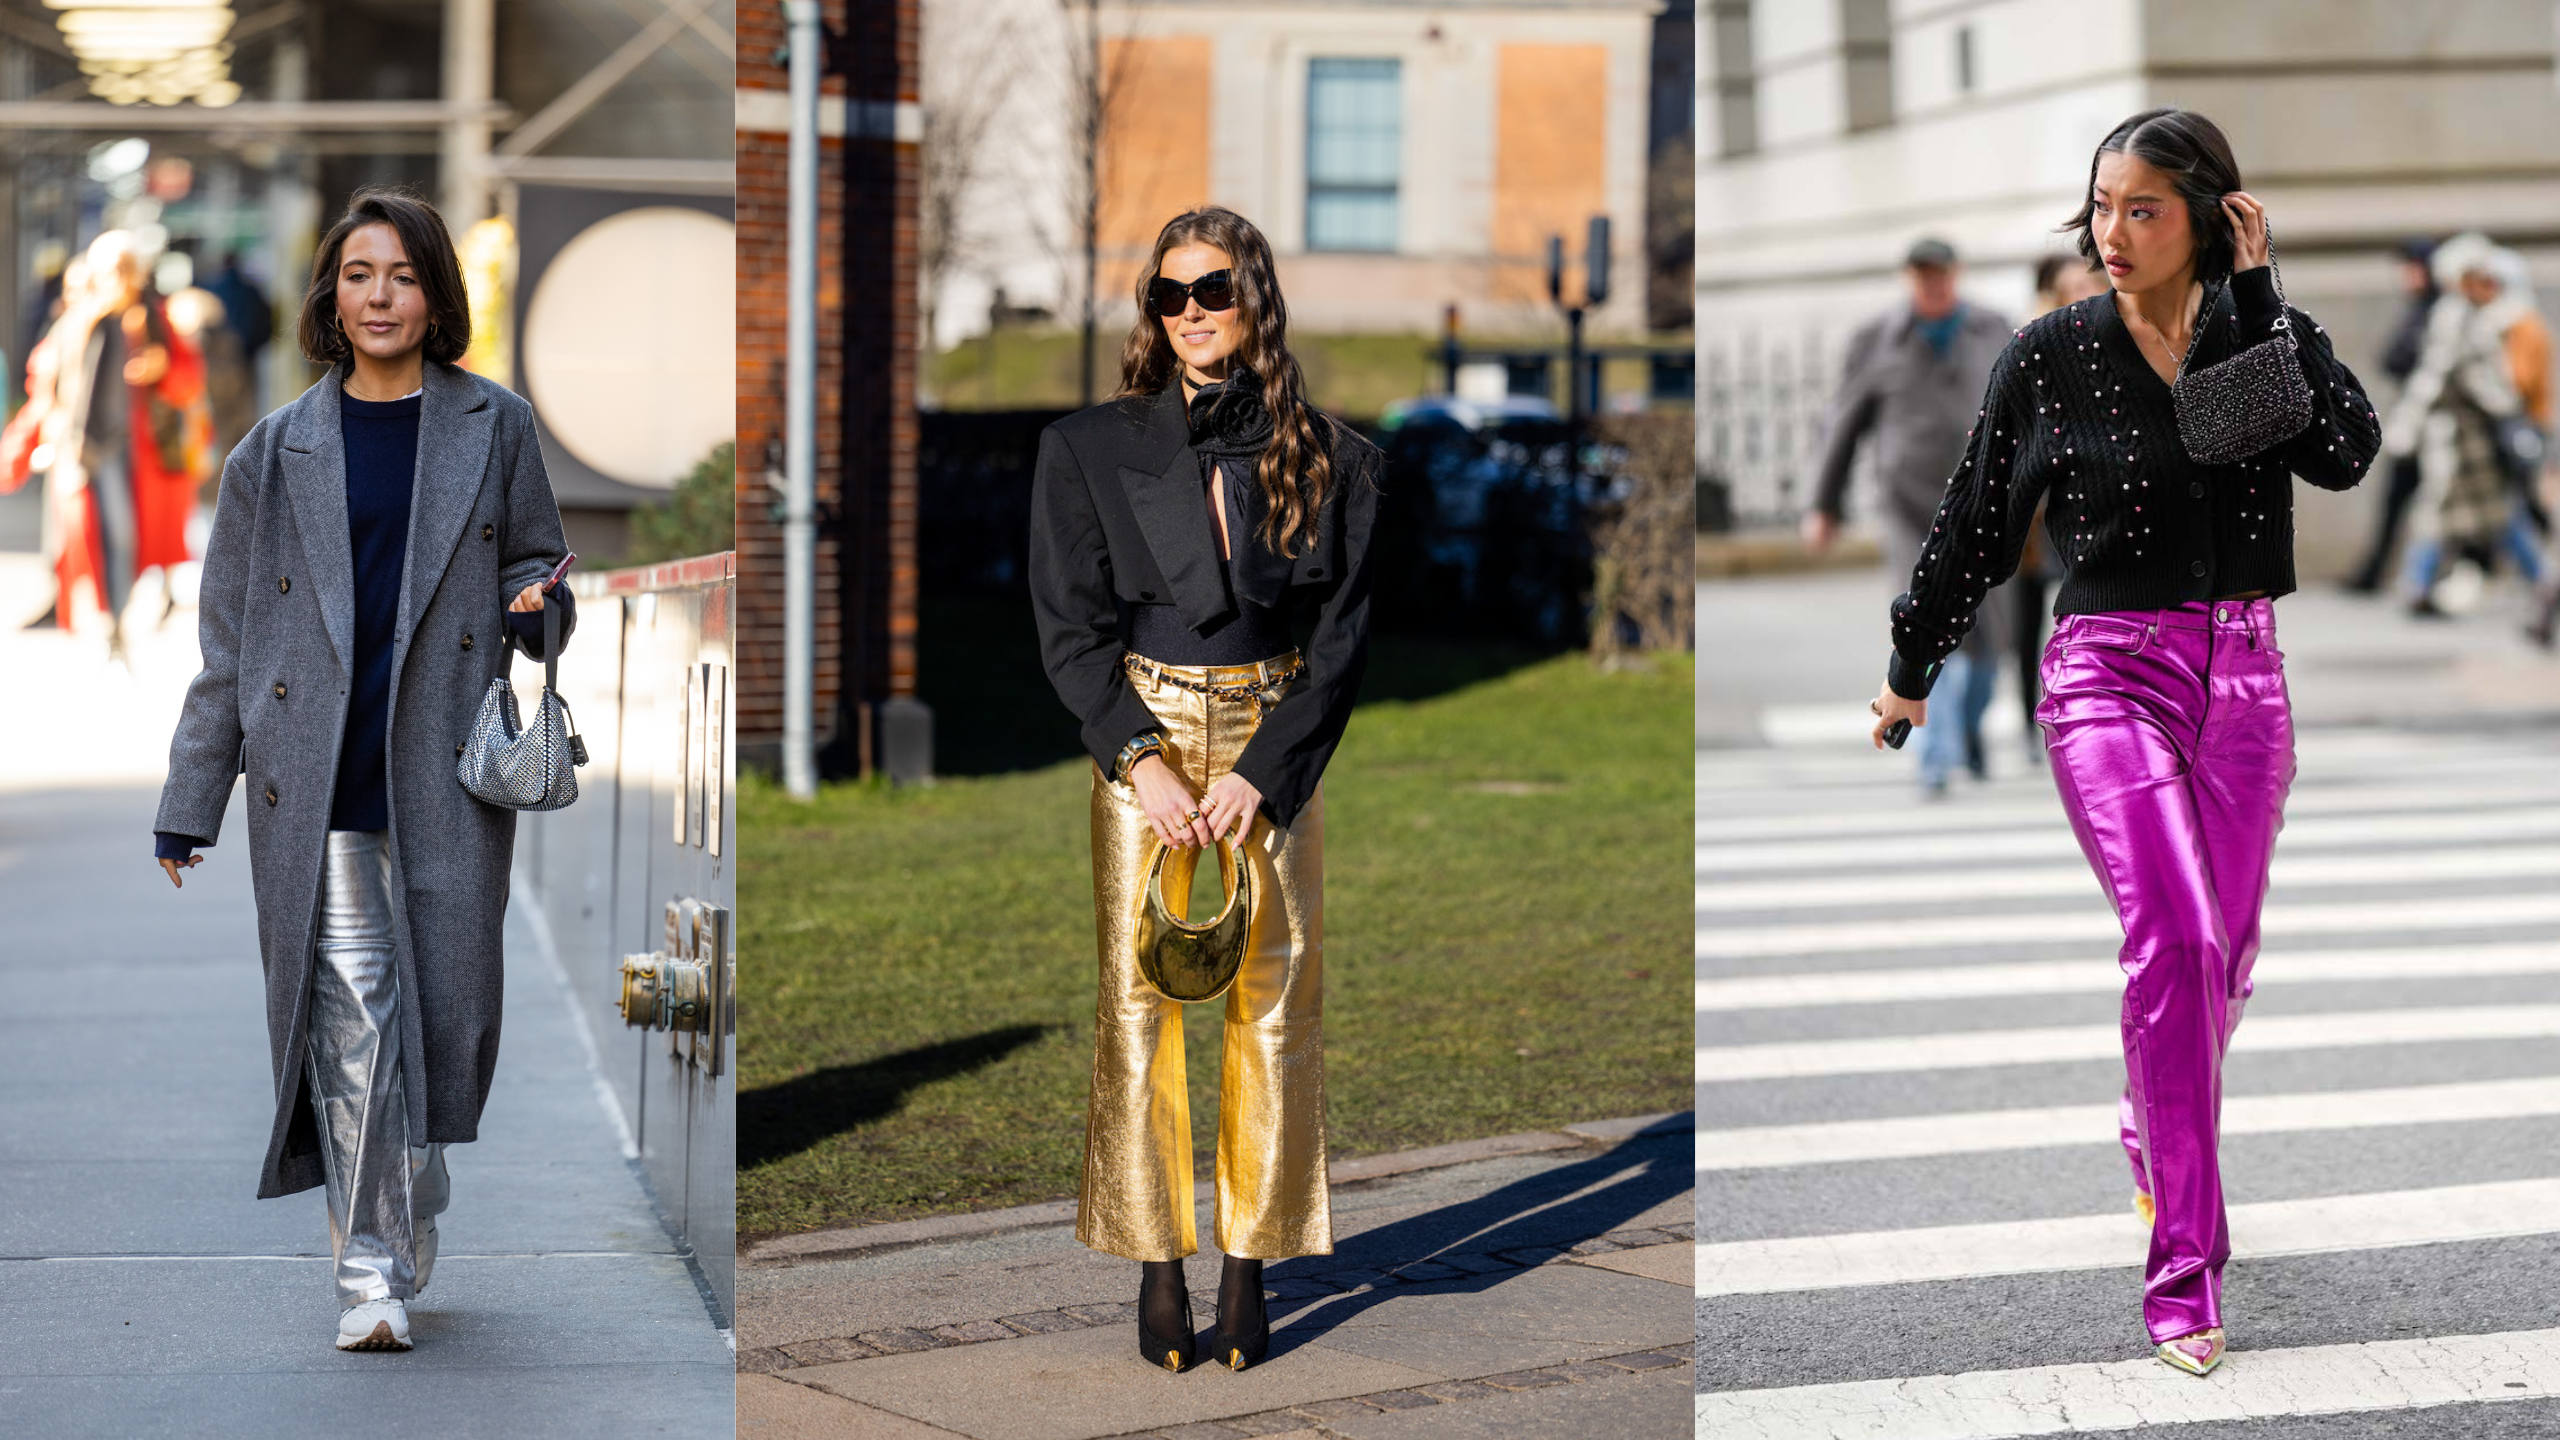 Le Fashion: How to Wear Gold Metallic Pants This Fall